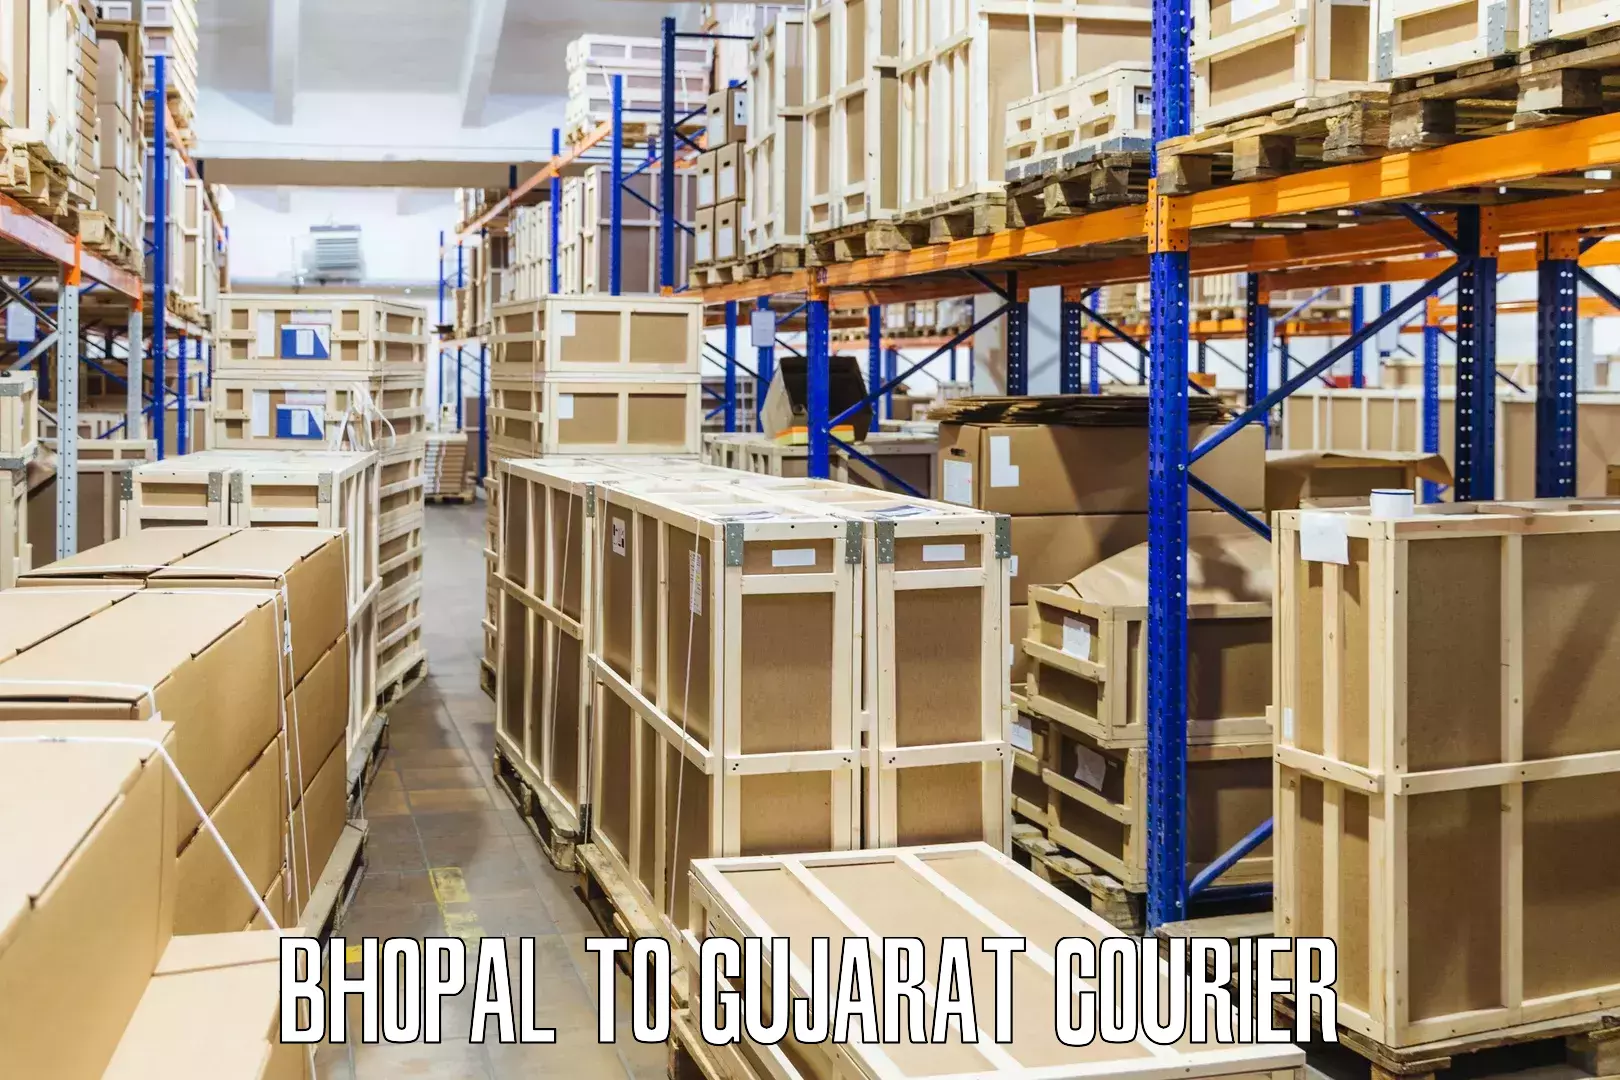 Multi-city courier Bhopal to Ahwa